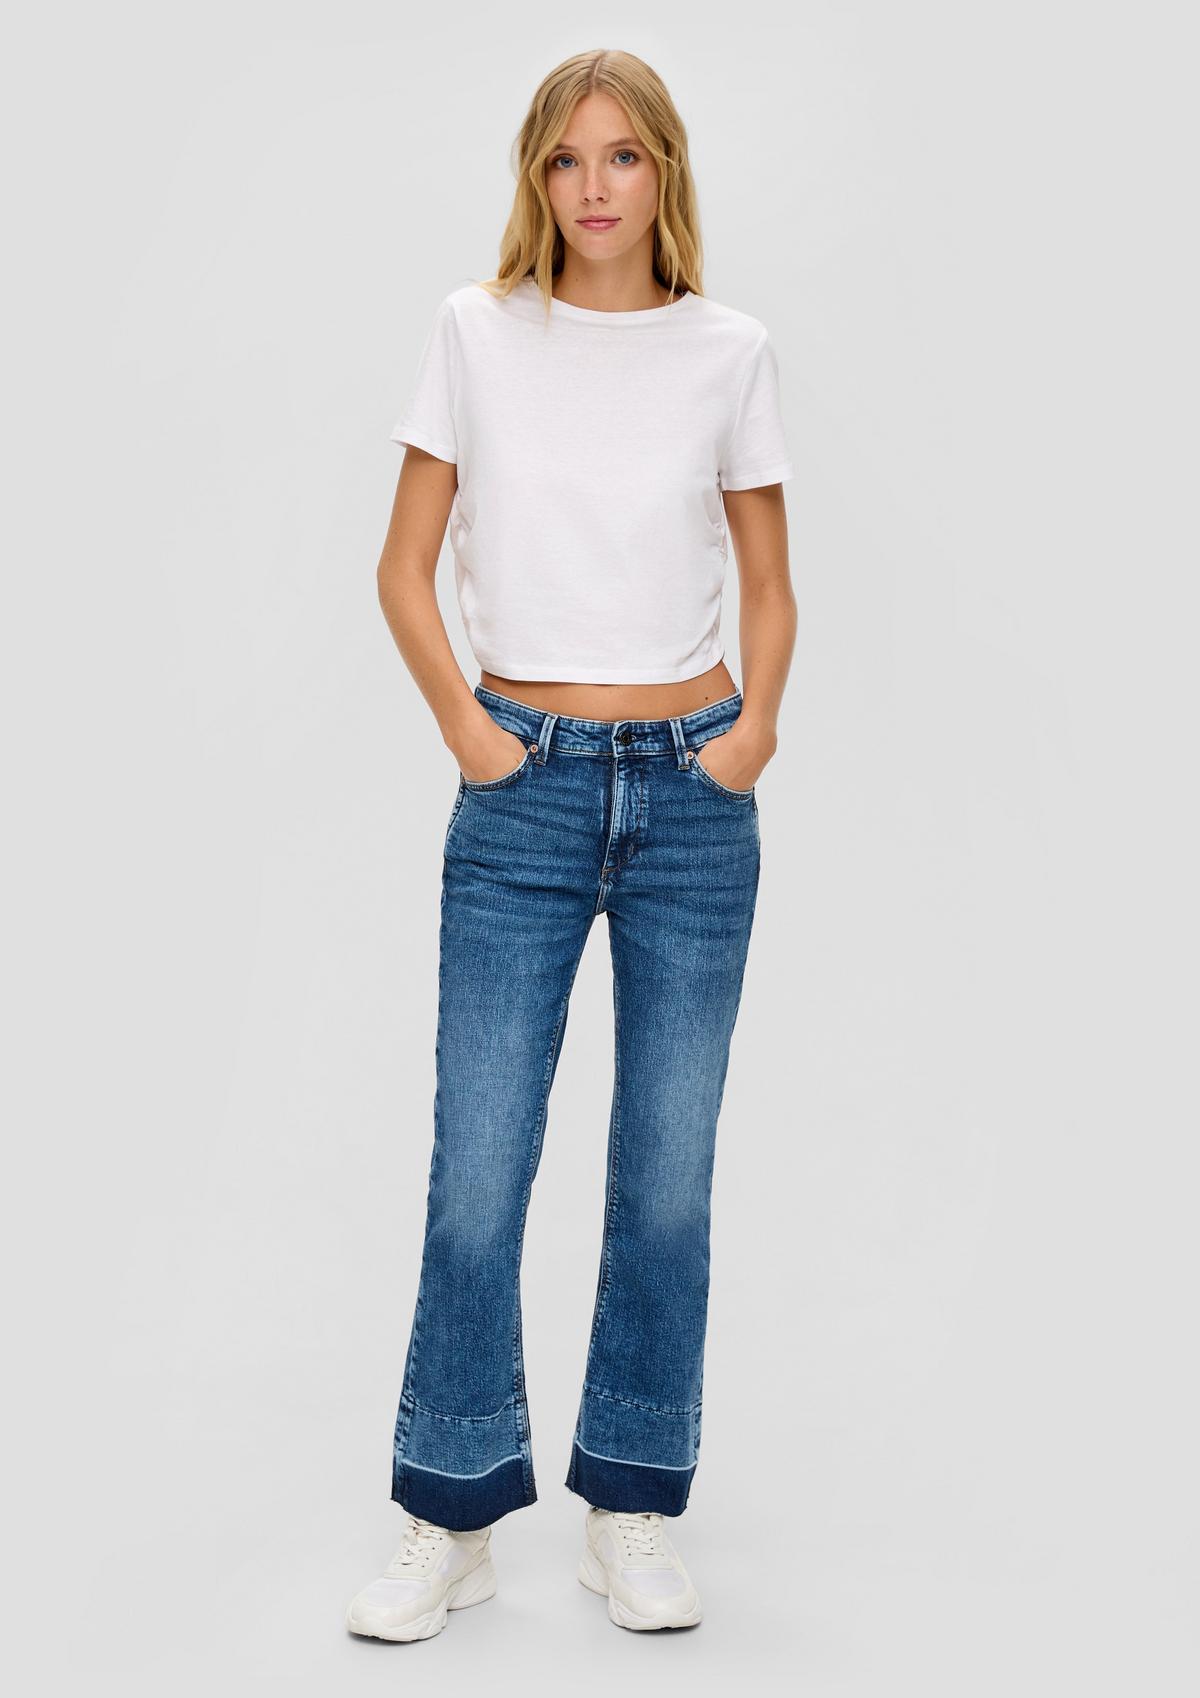 s.Oliver Cropped jeans Reena / slim fit / high rise / flared leg